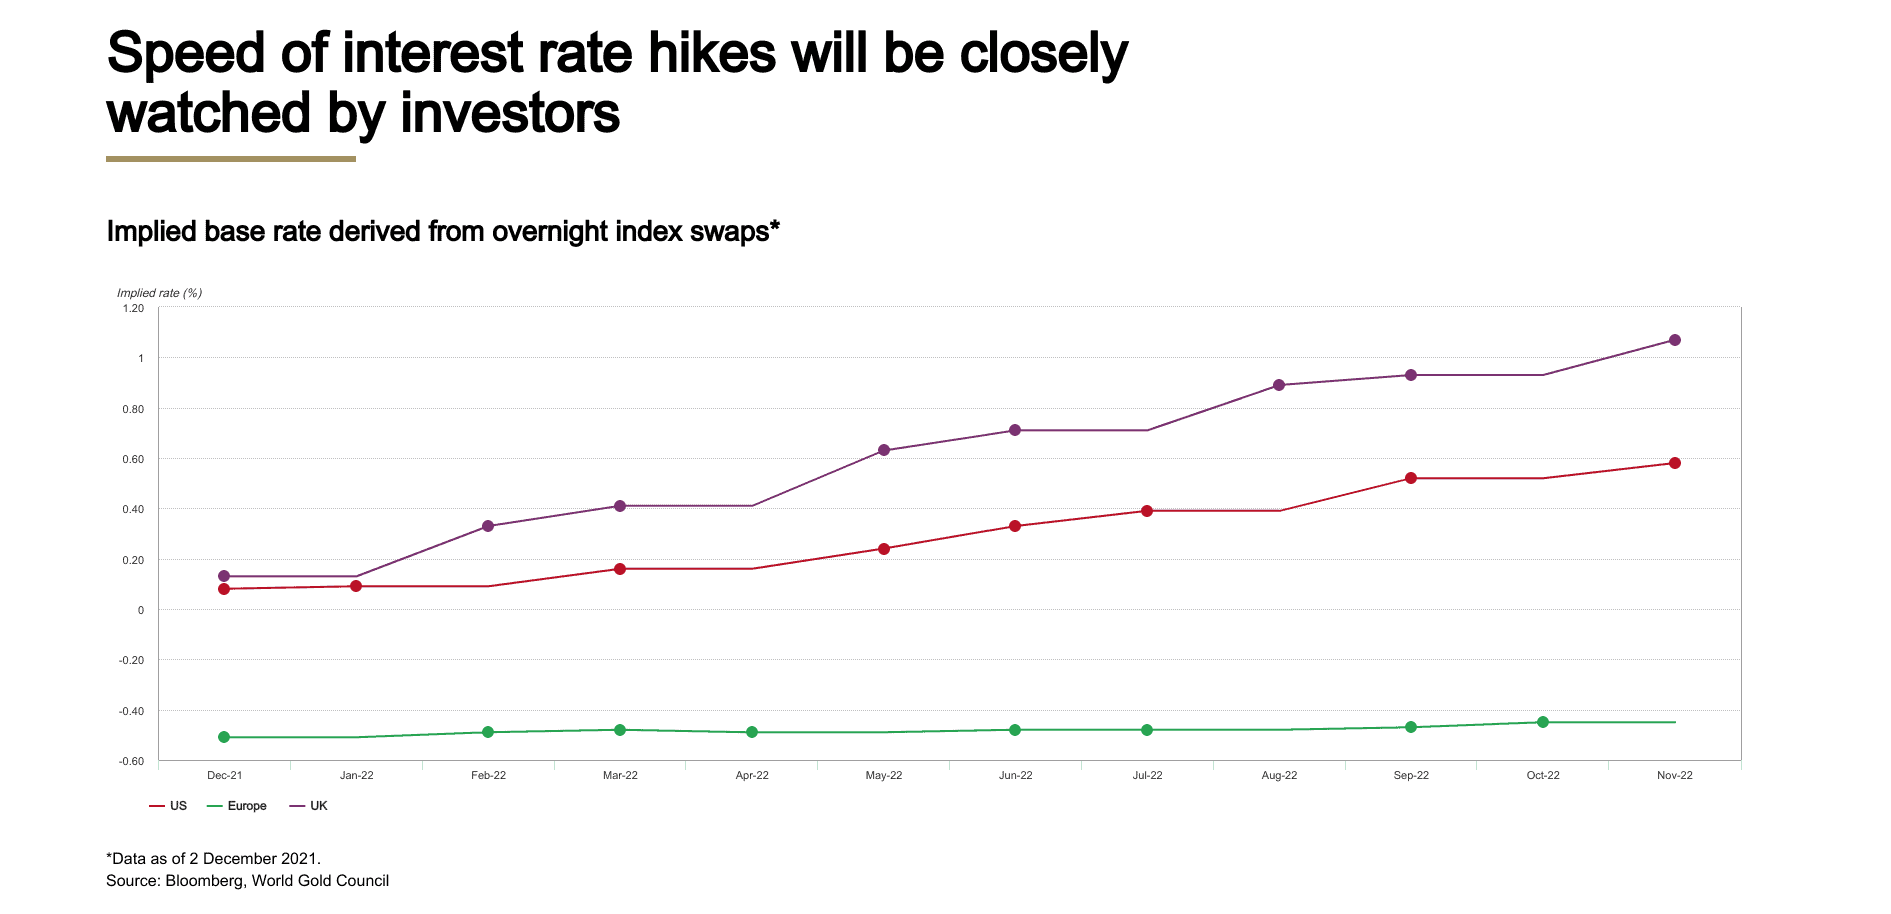 Speed of interest rate hikes will be closely watched by investors